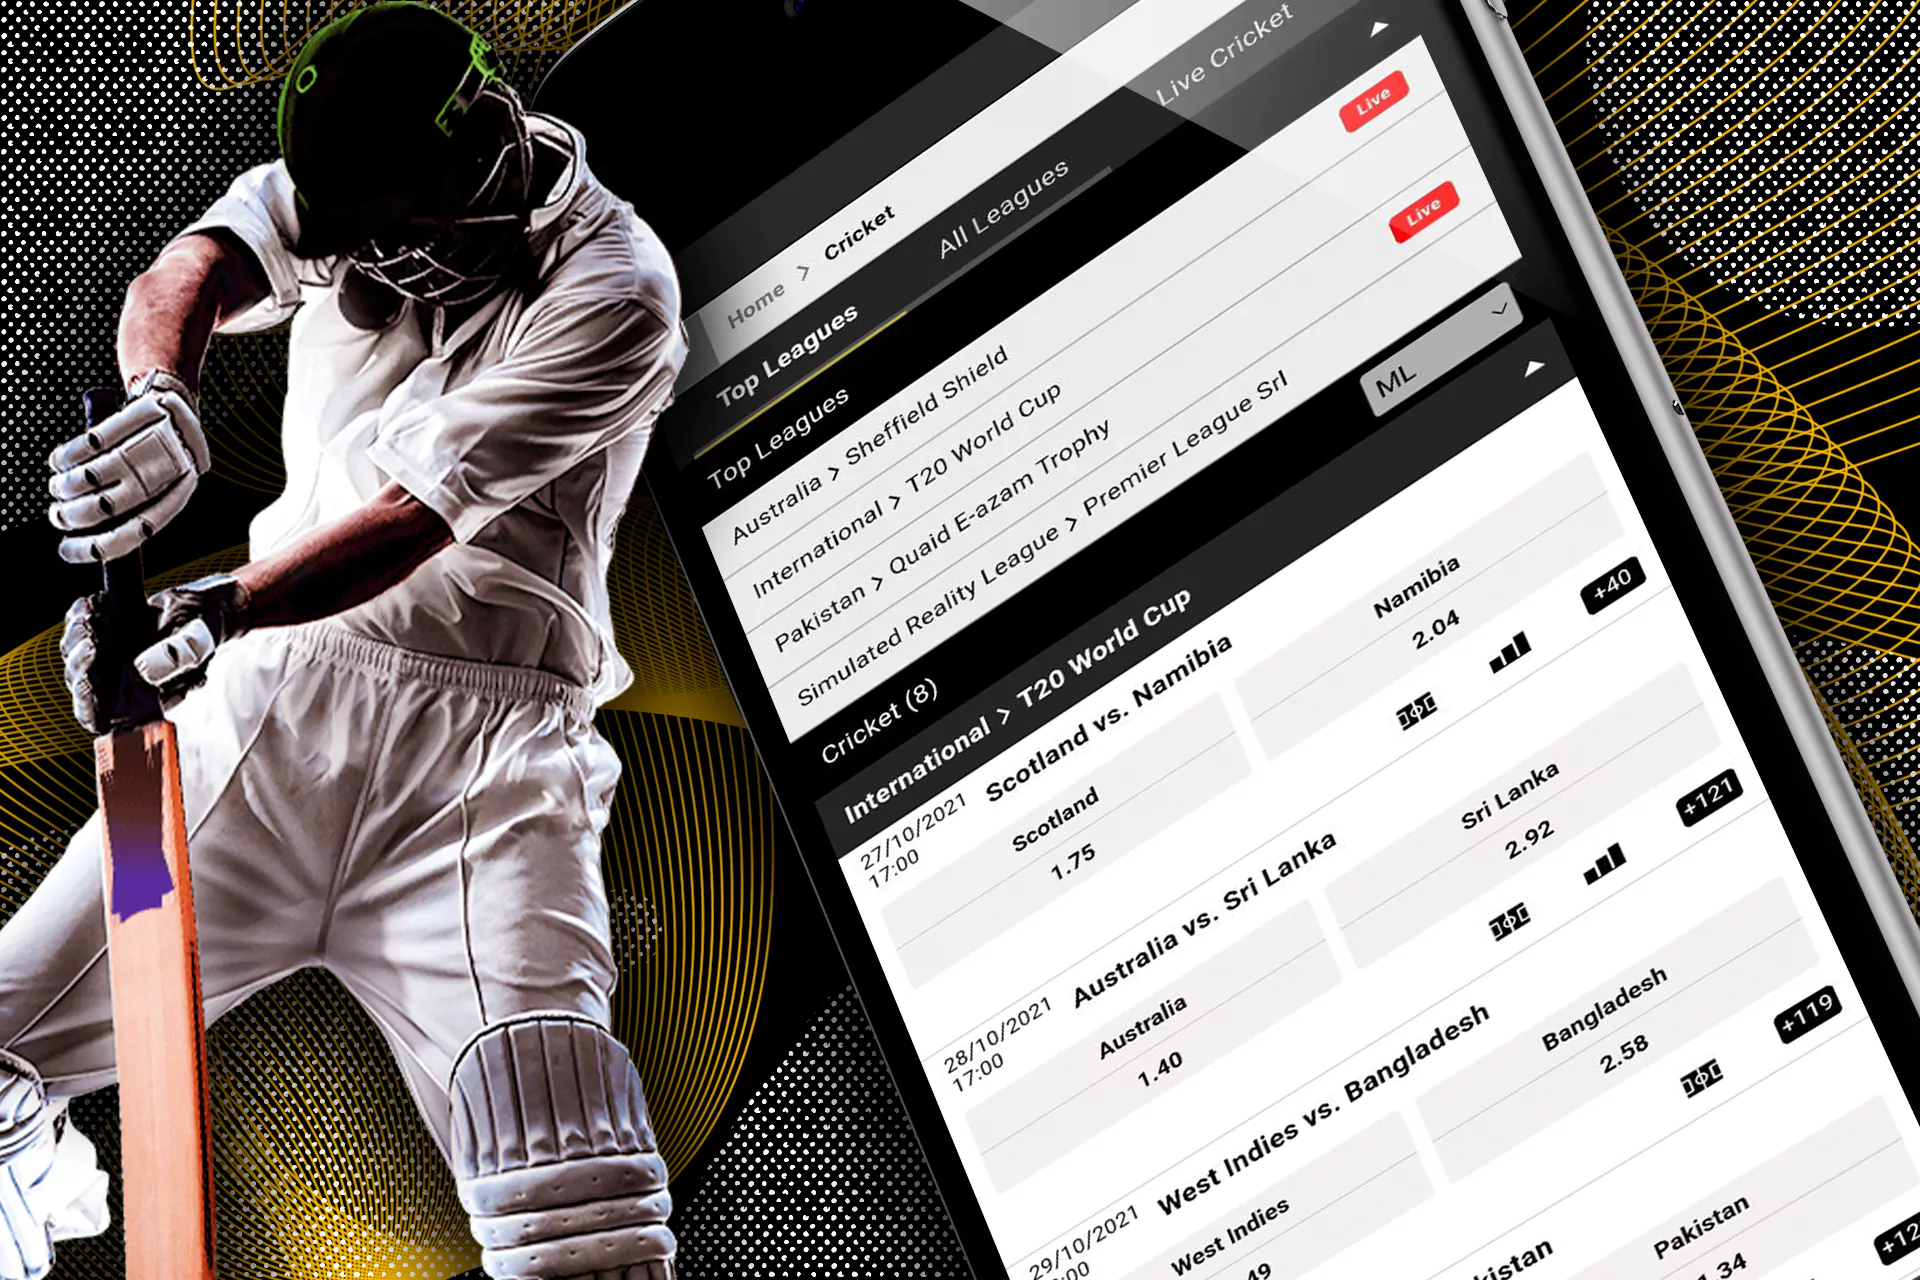 Run the app, look through the list of sports disciplines and choose cricket to place a bet on its match.